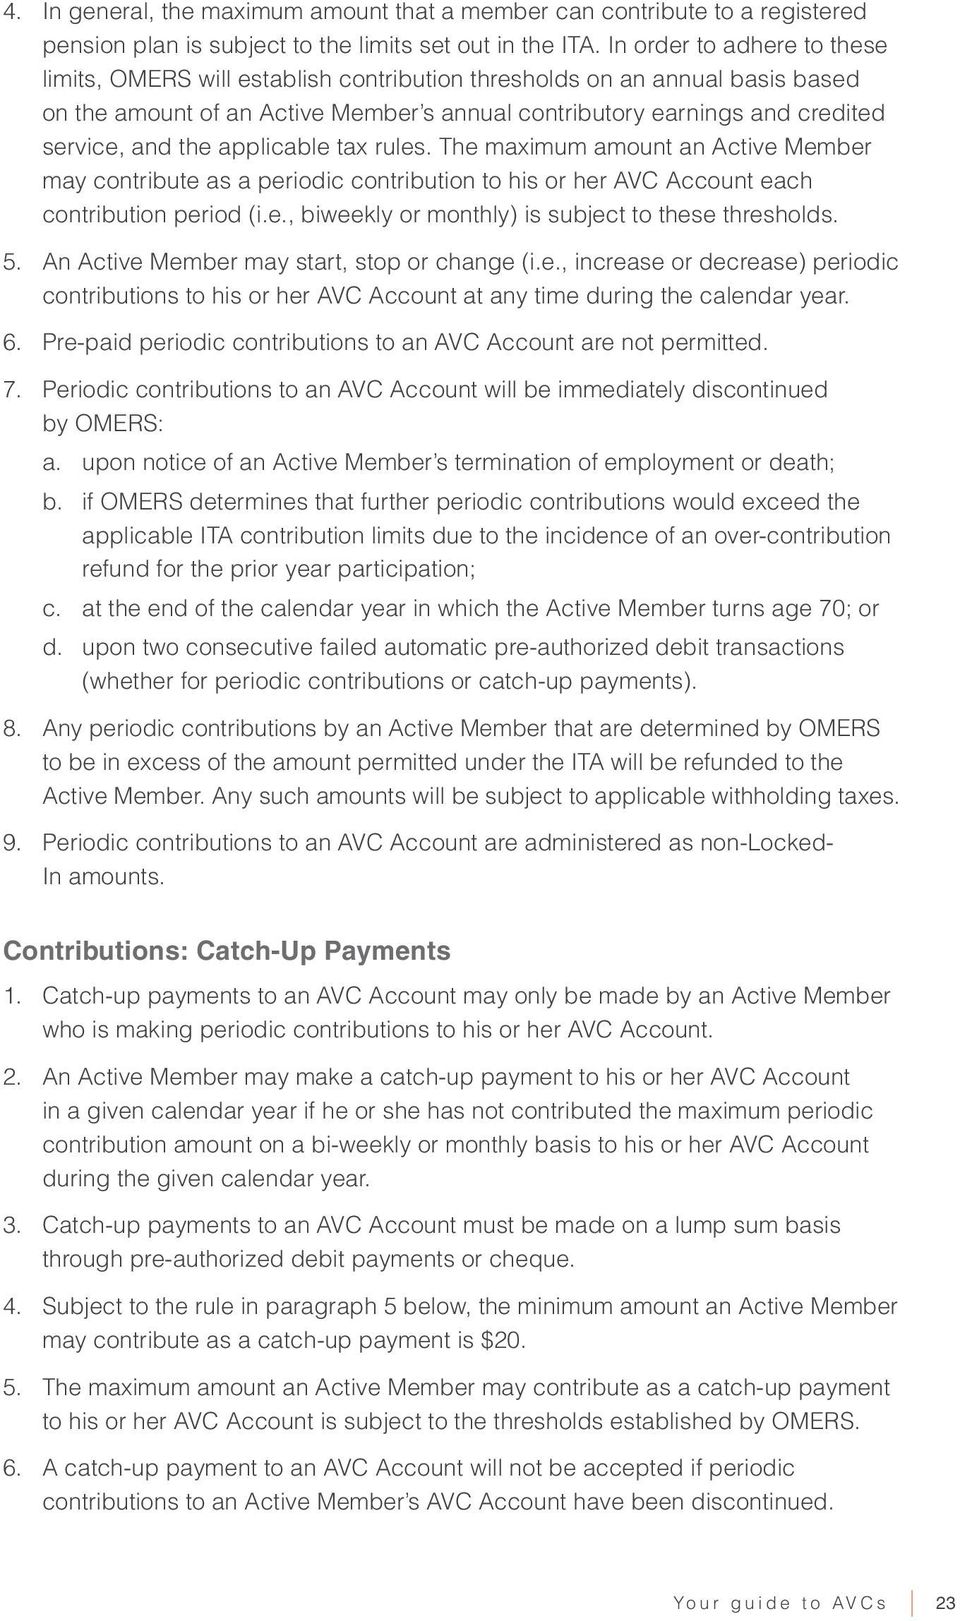 the applicable tax rules. The maximum amount an Active Member may contribute as a periodic contribution to his or her AVC Account each contribution period (i.e., biweekly or monthly) is subject to these thresholds.